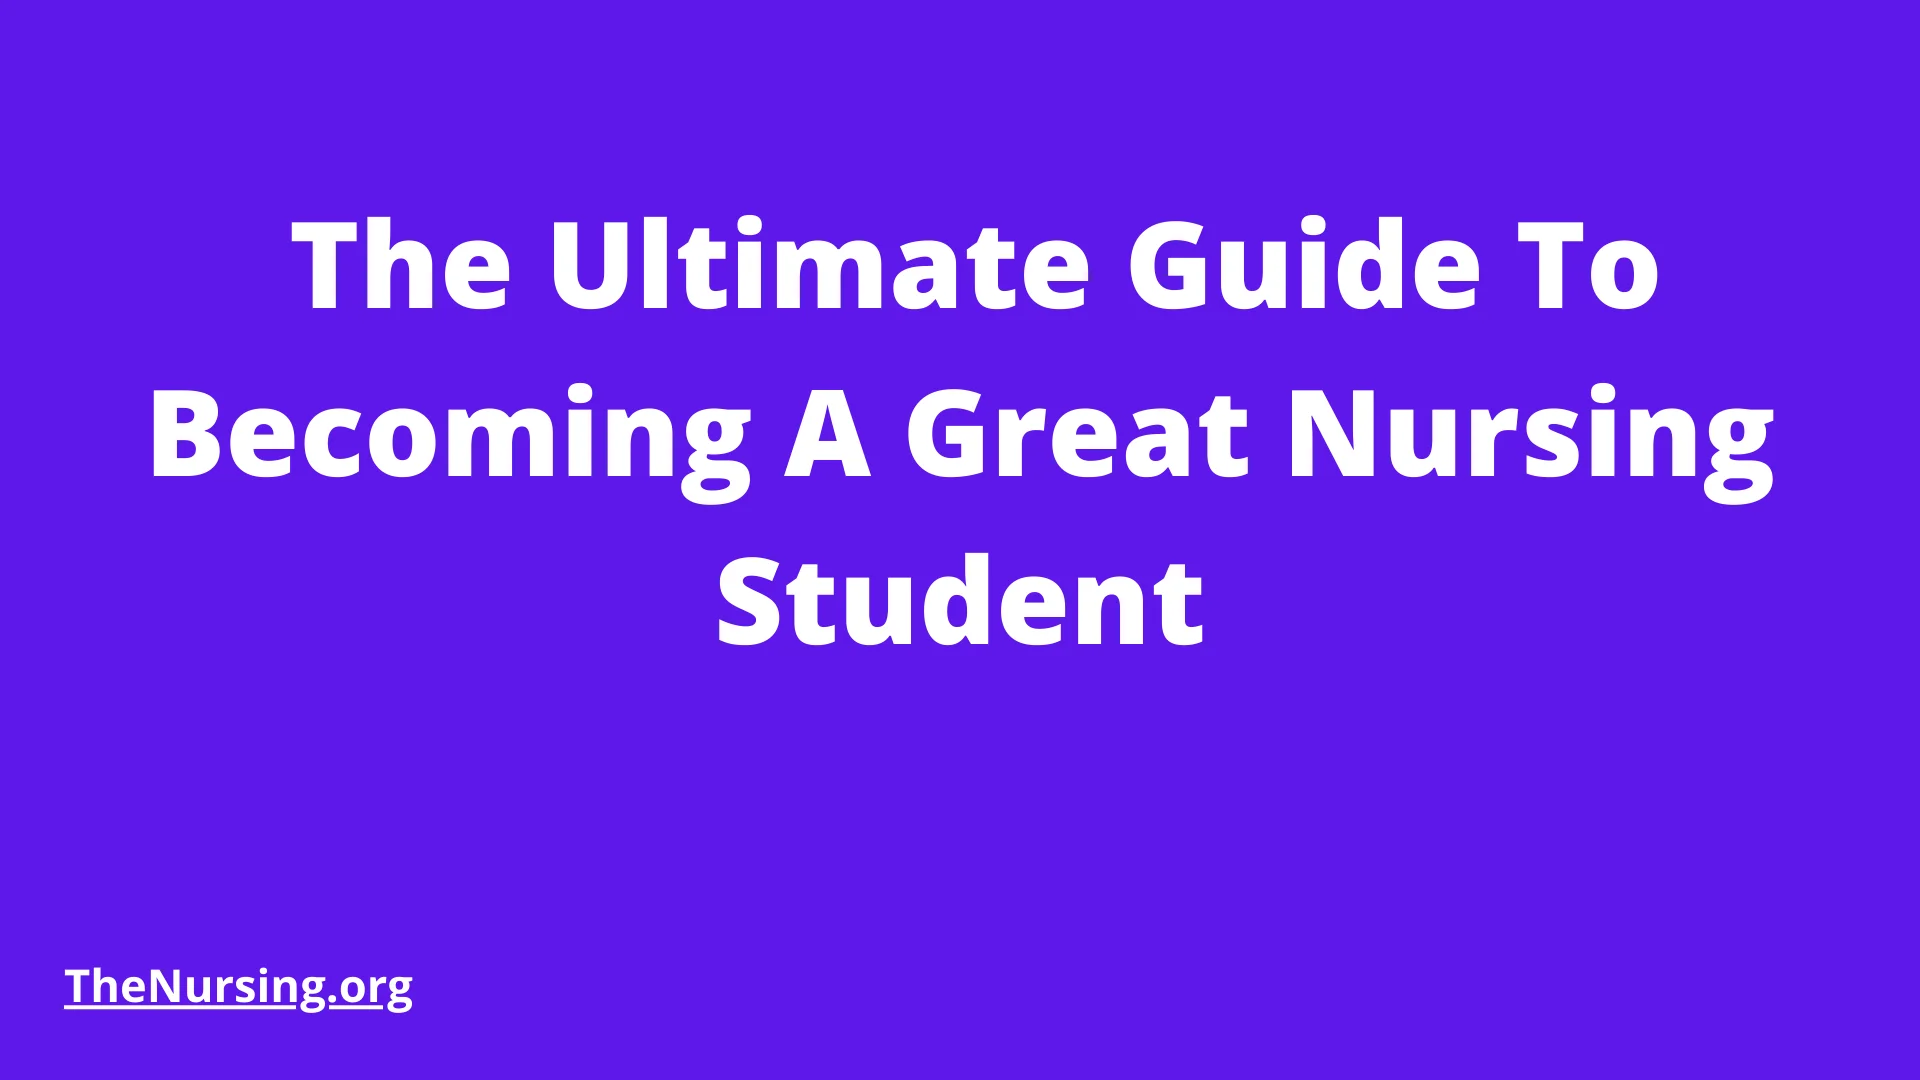 The-Ultimate-Guide-To-Becoming-A-Great-Nursing-Student.webp